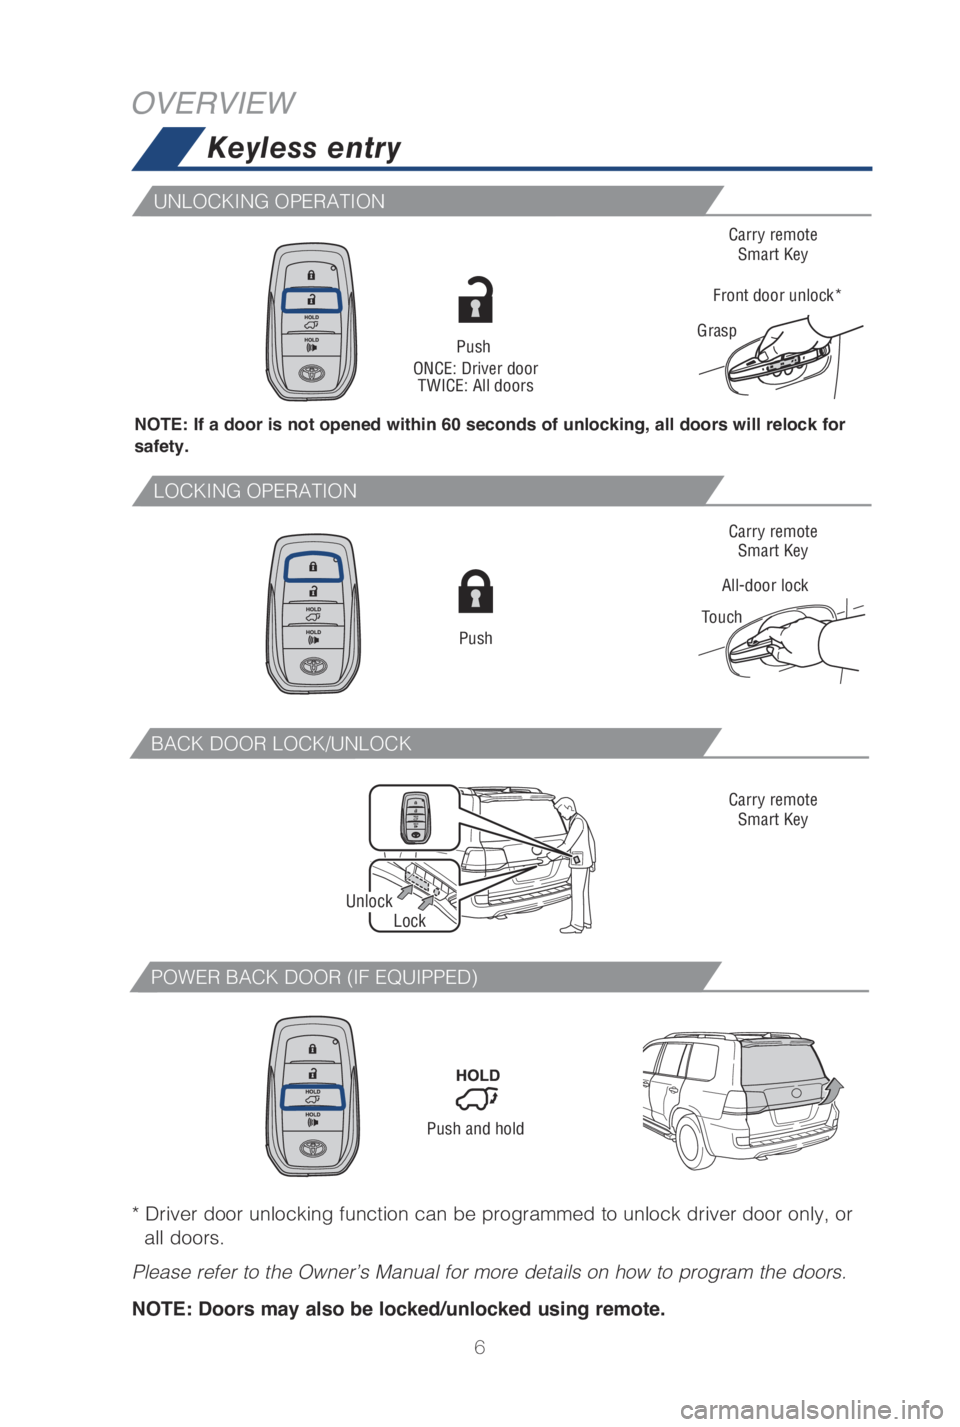 TOYOTA LAND CRUISER 2019  Owners Manual (in English) 6
Keyless entry
OVERVIEW
NOTE: If a door is not opened within 60 seconds of unlocking, all doors will relock for 
safety.
Push
ONCE: Driver door TWICE: All doors
All-door lock
Touch Carry remote 
Smar